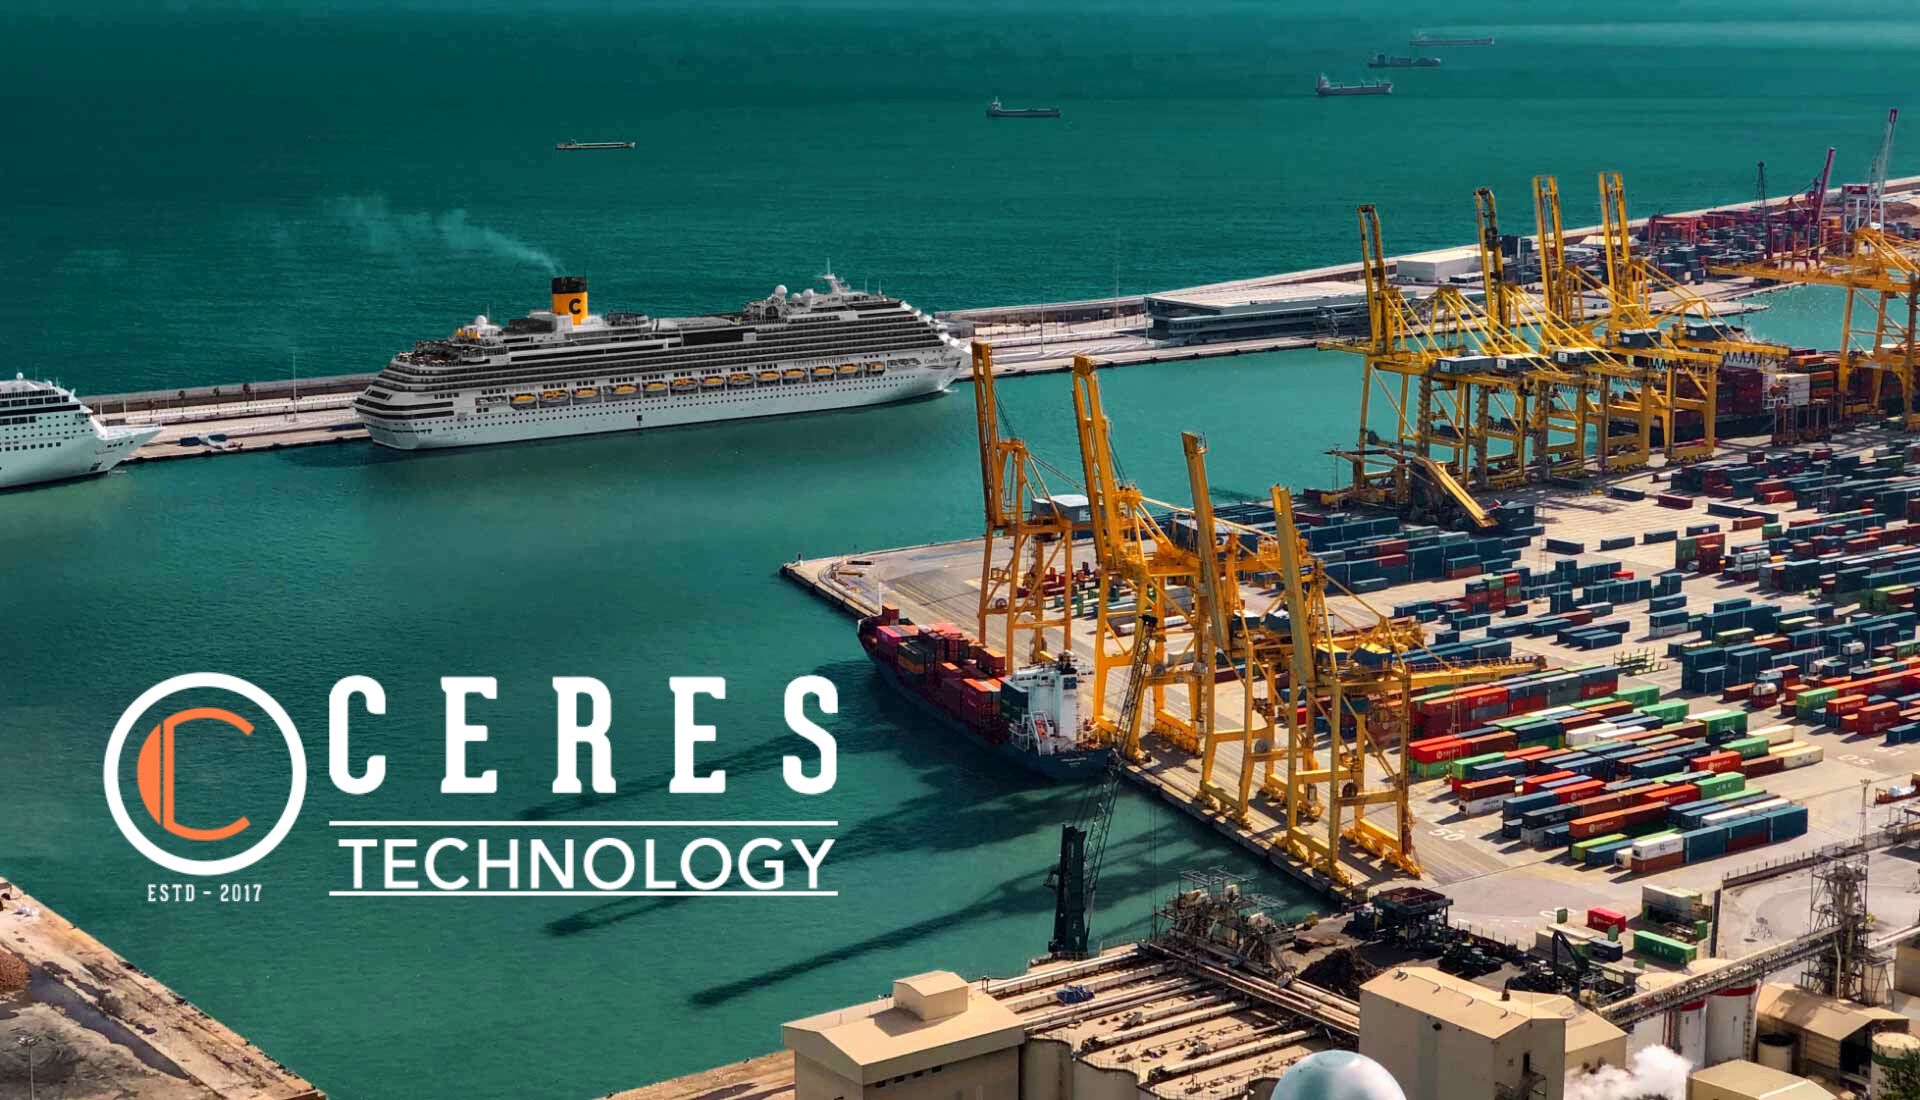 Logistics & Supply Chain Management Software - Ceres Technology